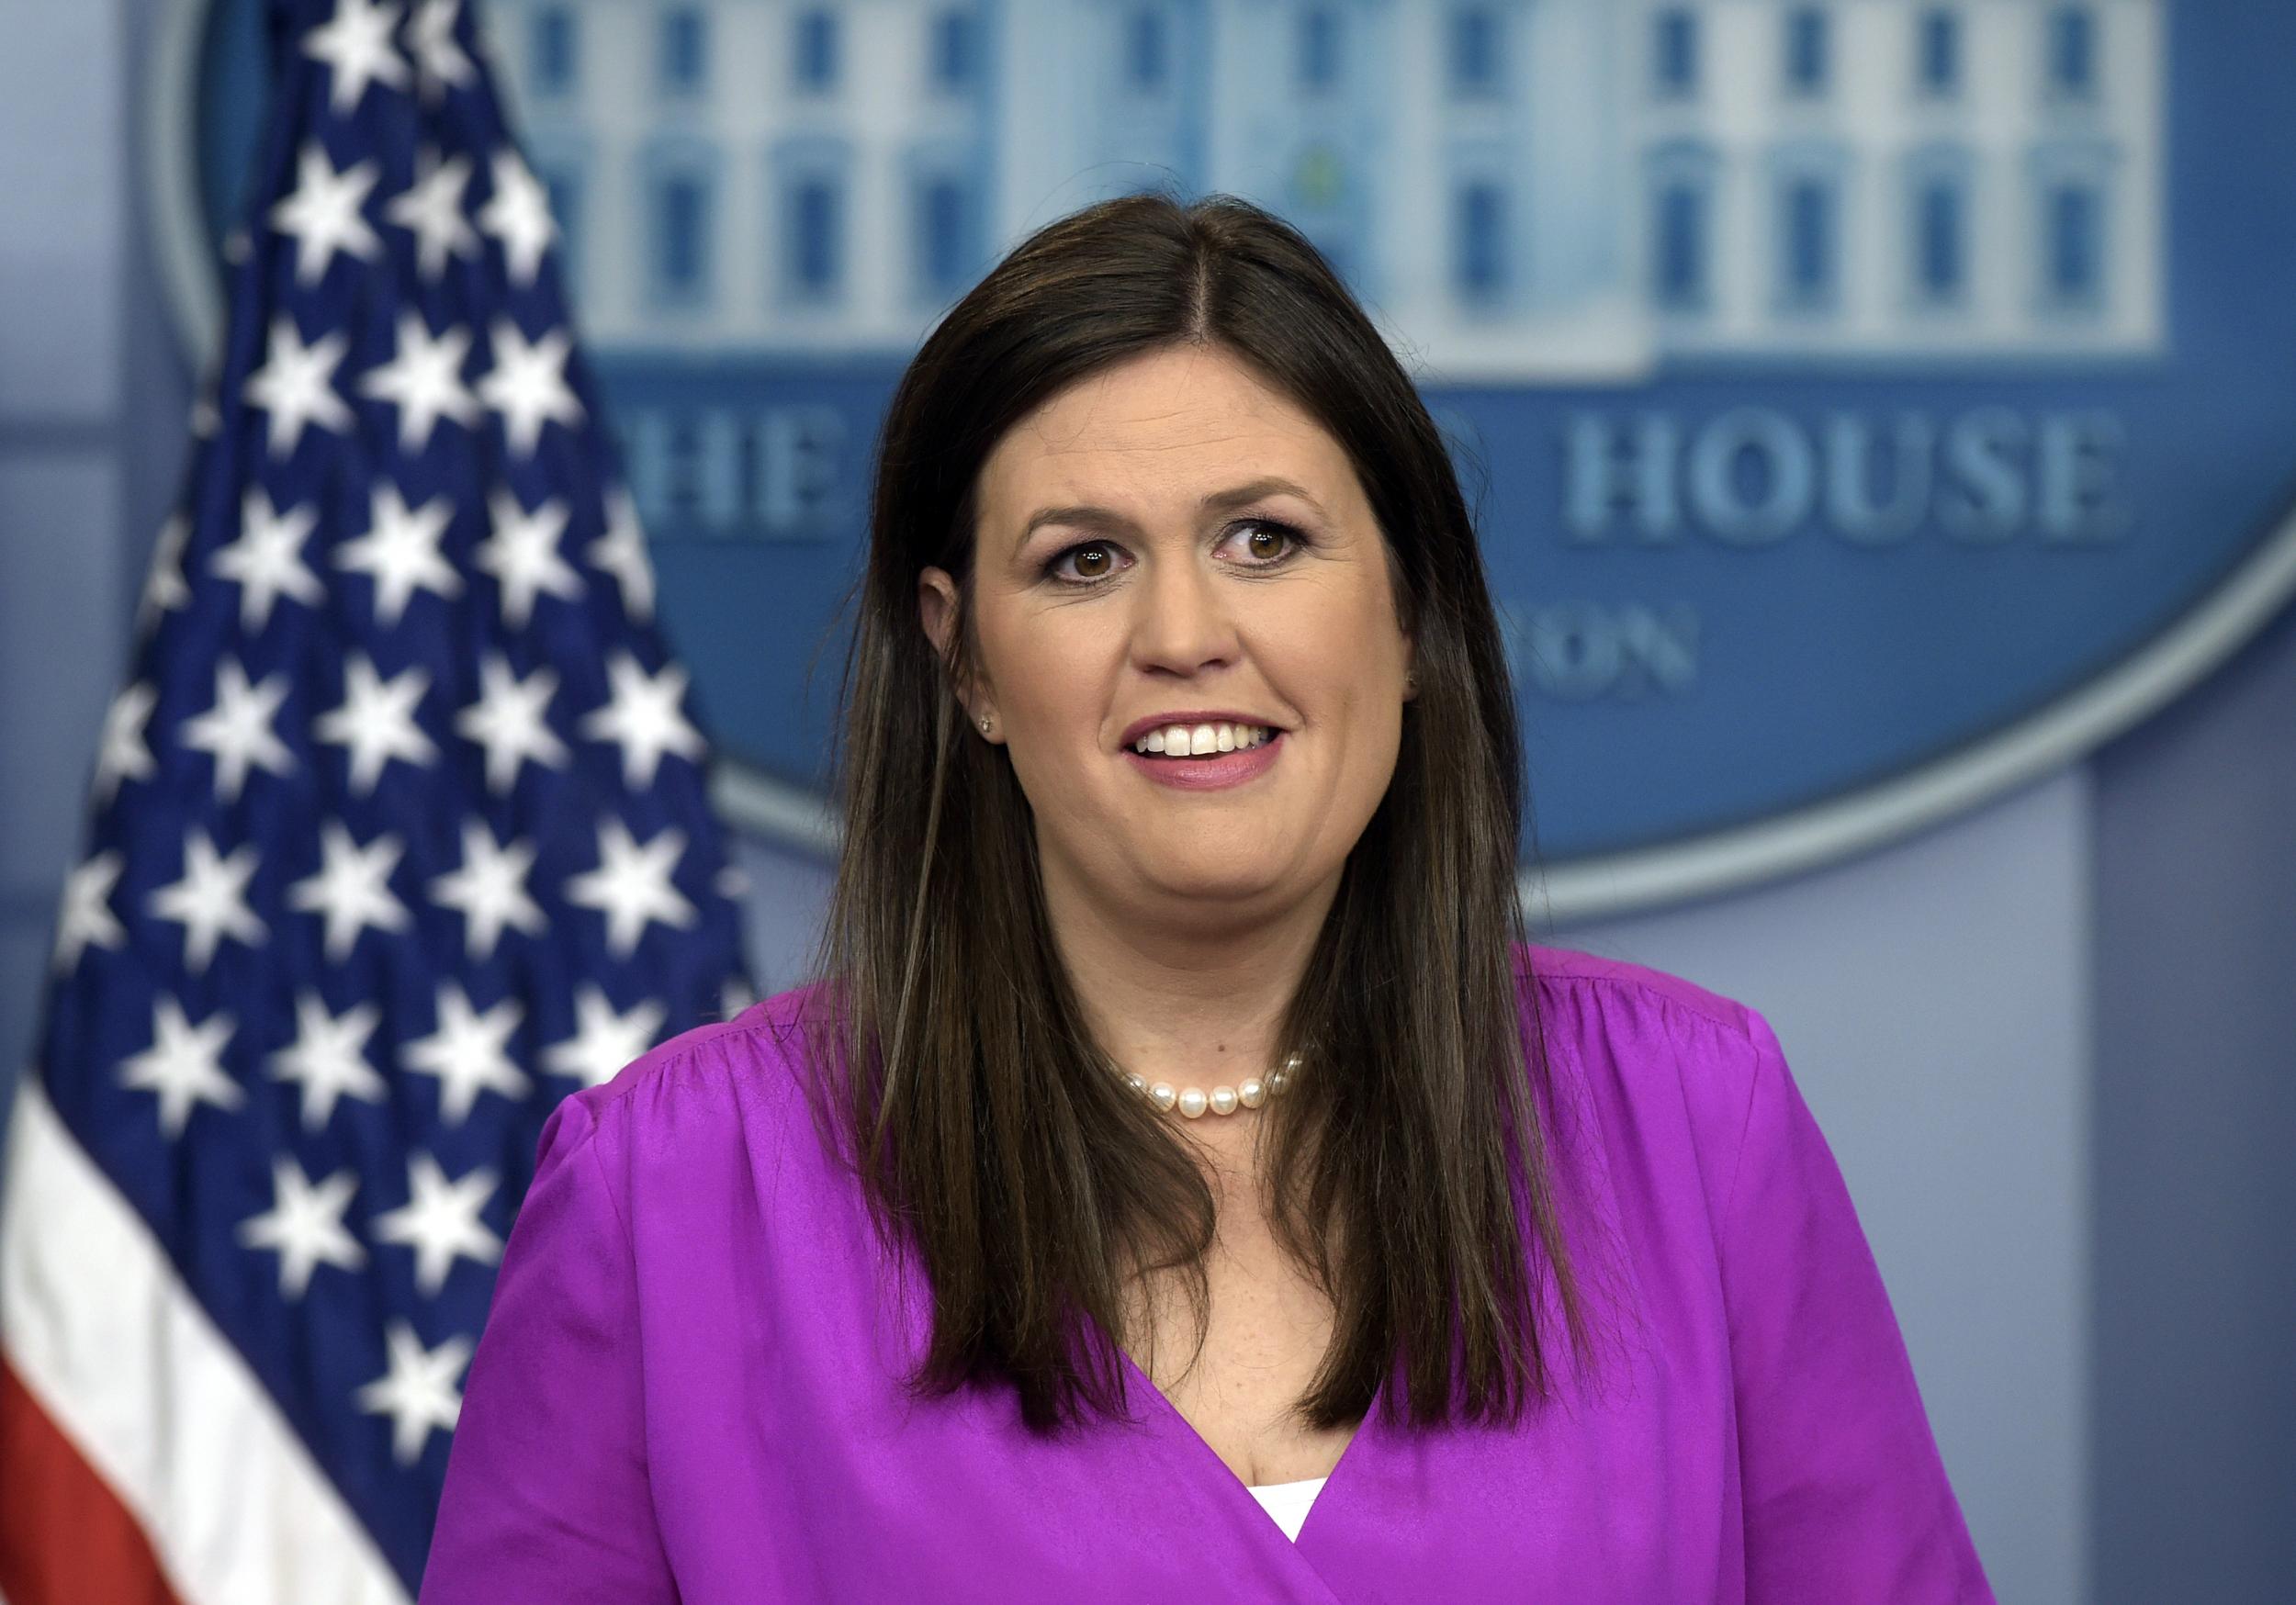 Sarah Huckabee was mocked for her weight by the Pulitzer Prize winning journalist